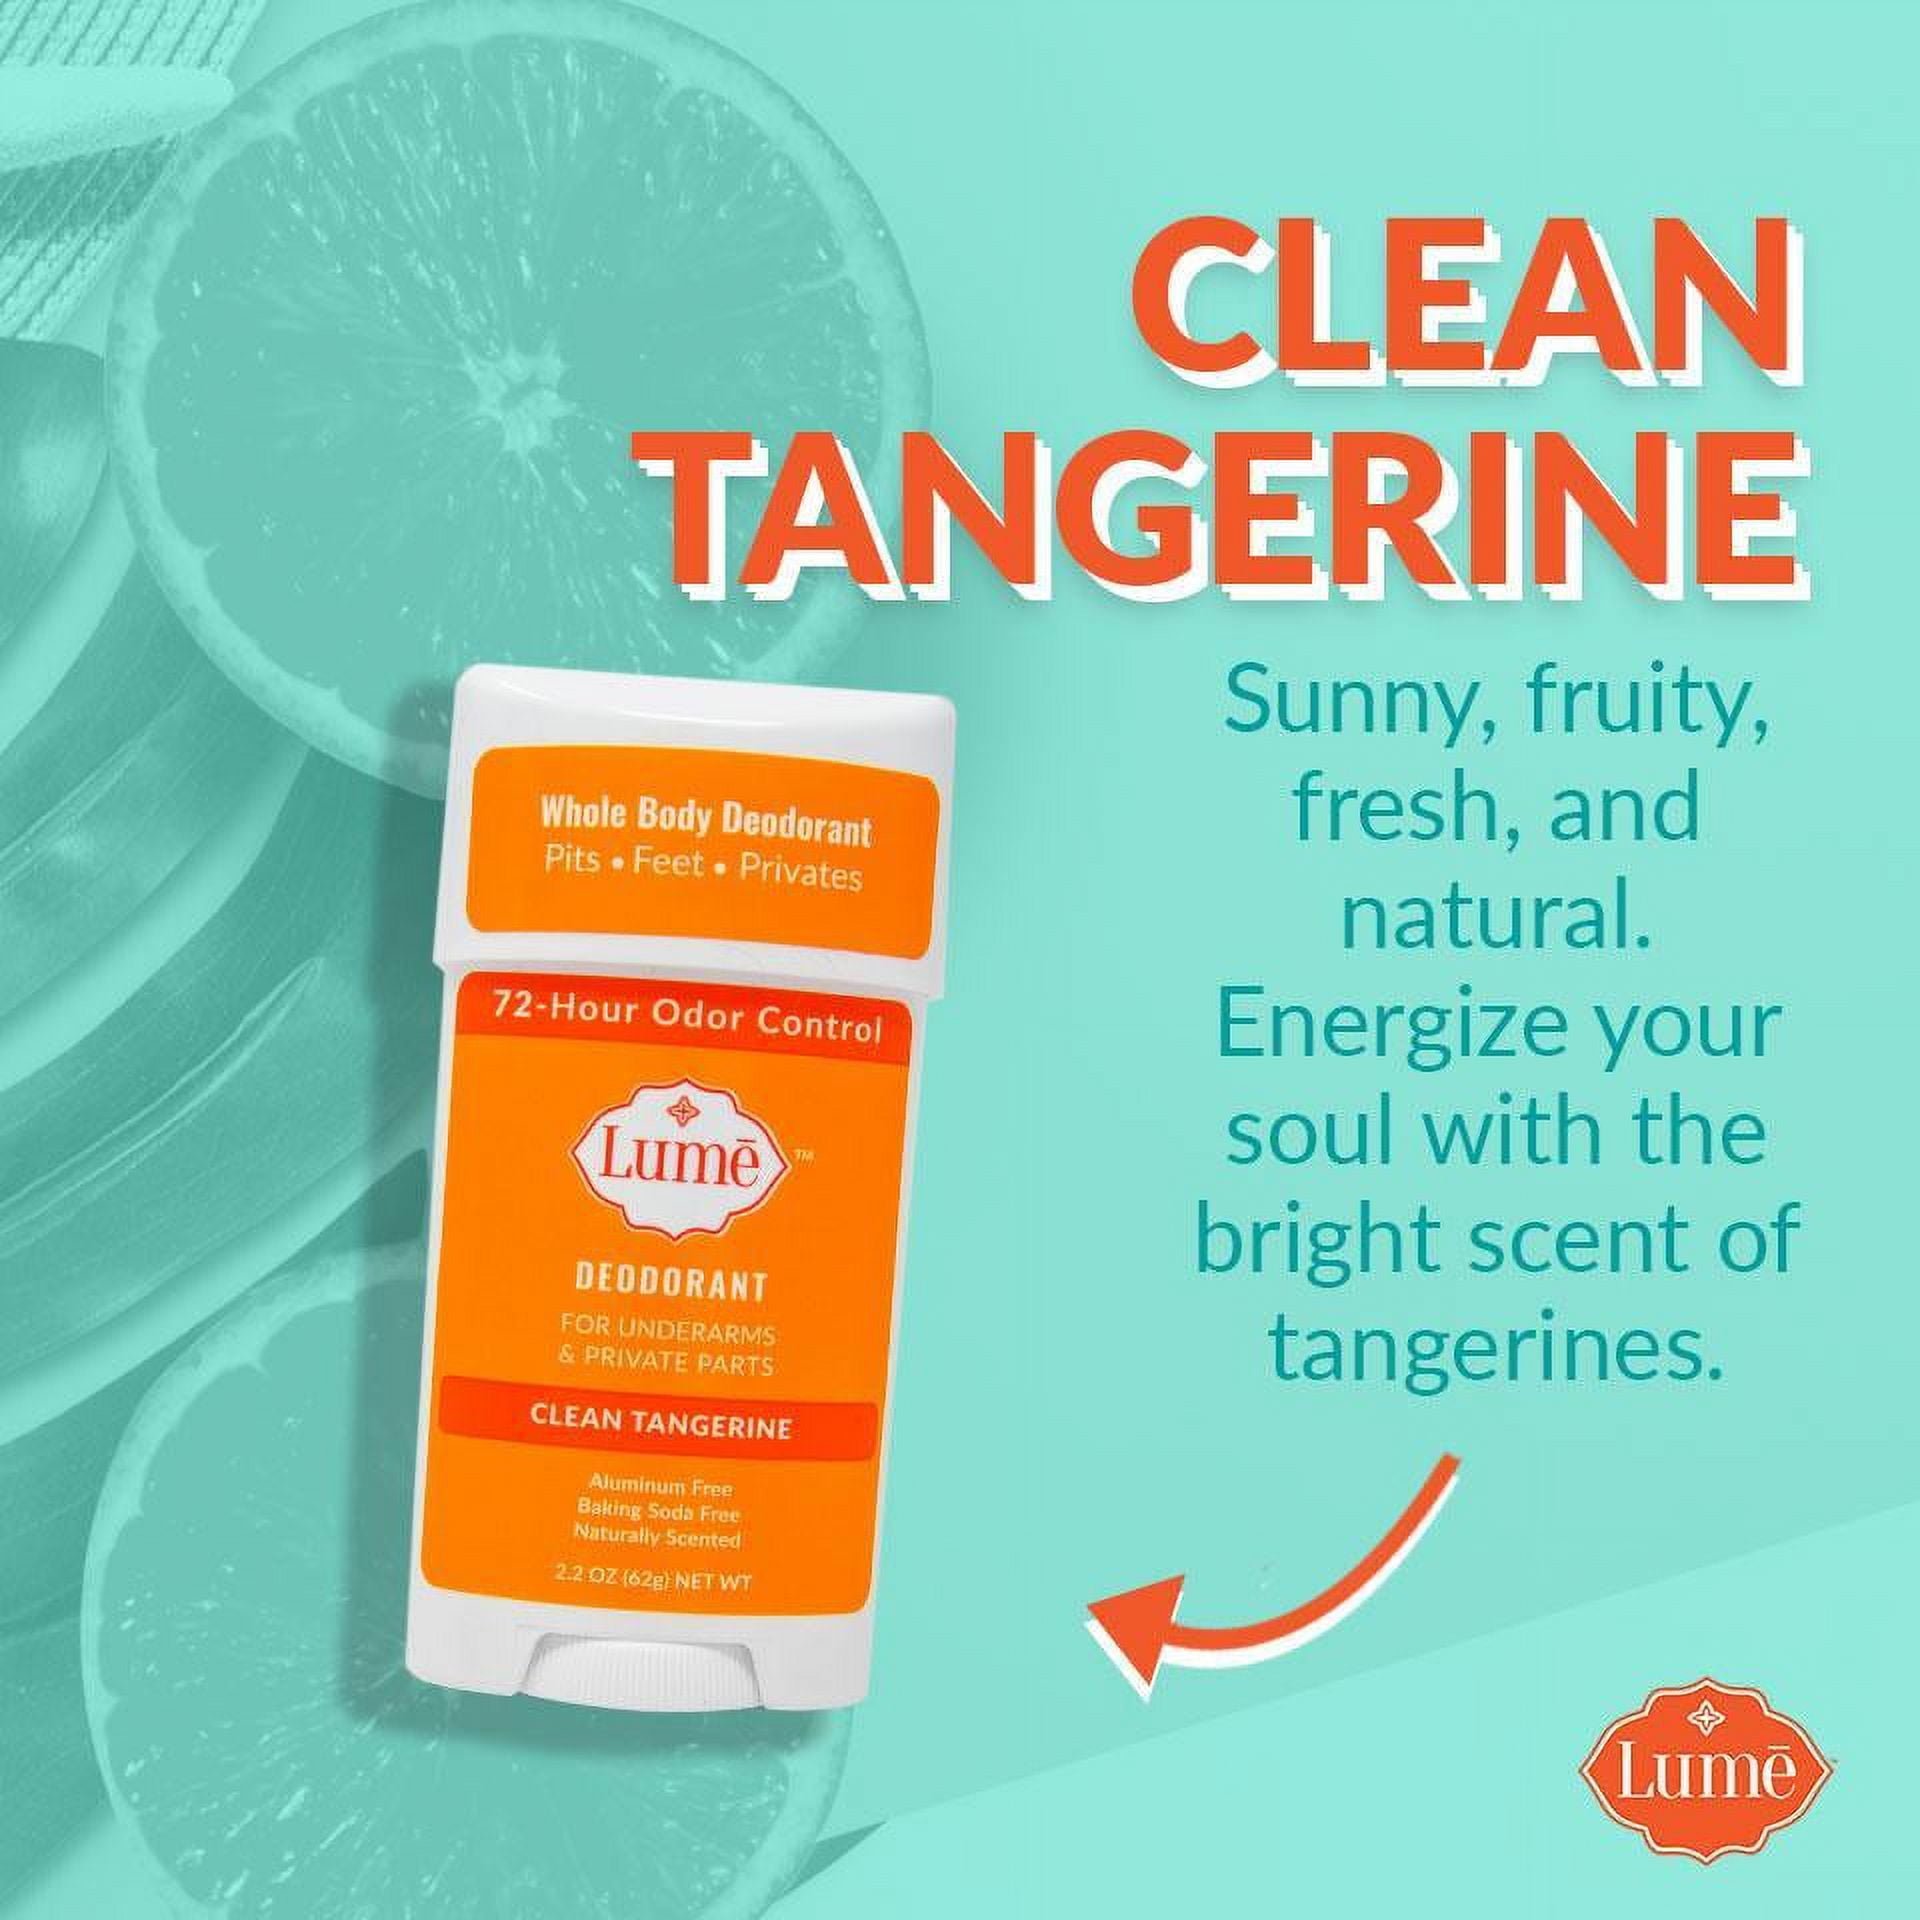 Lume Natural Deodorant - Underarms and Private Parts - Aluminum Free,  Baking Soda Free, Hypoallergenic, and Safe For Sensitive Skin - Travel Tube  + Propel Stick Bundle (Clean Tangerine) 